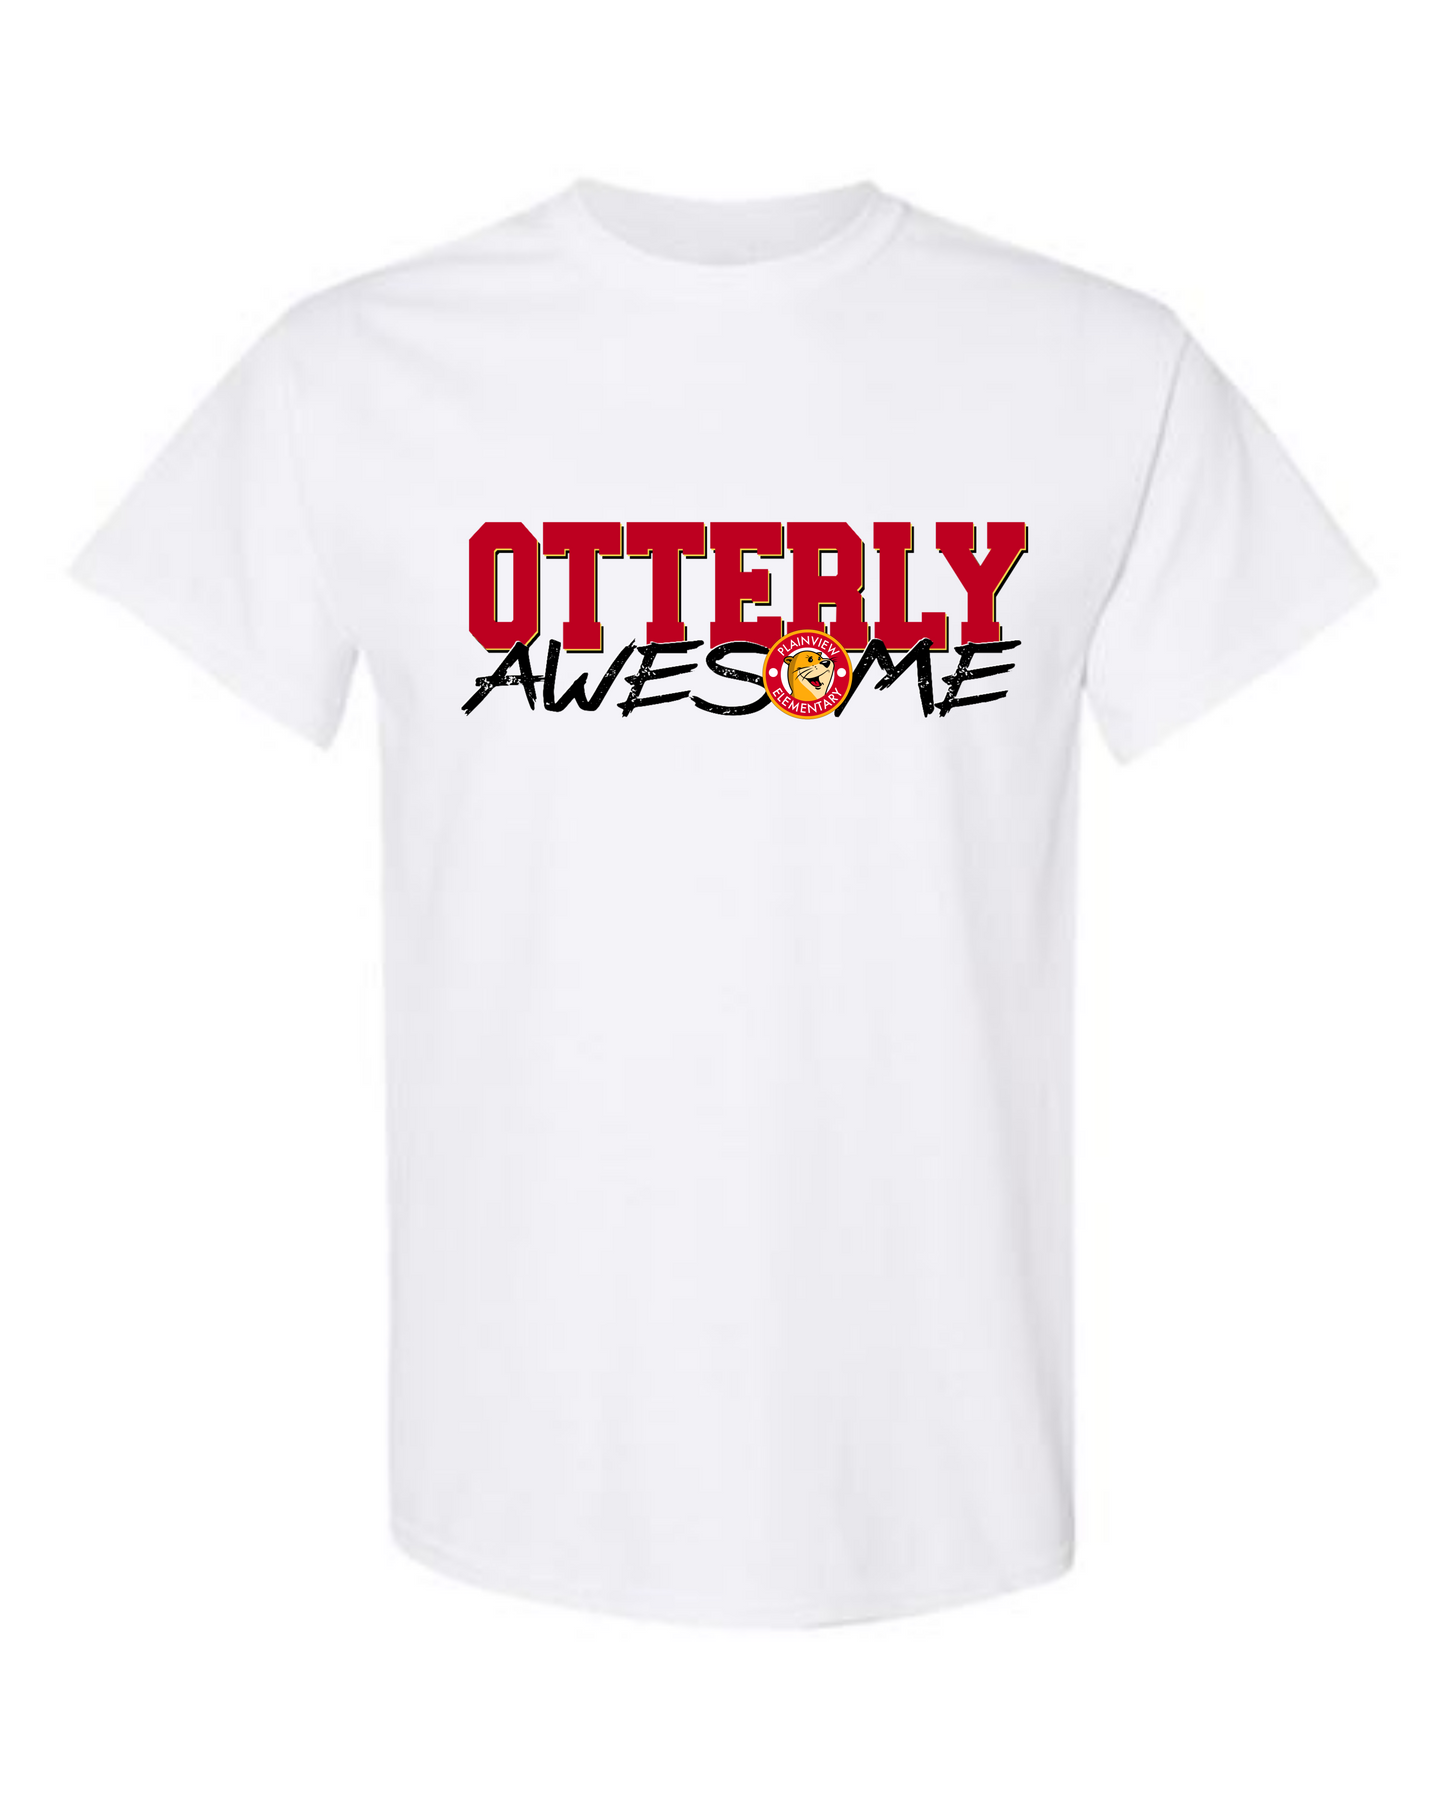 Otterly Awesome Logo Tshirt RED